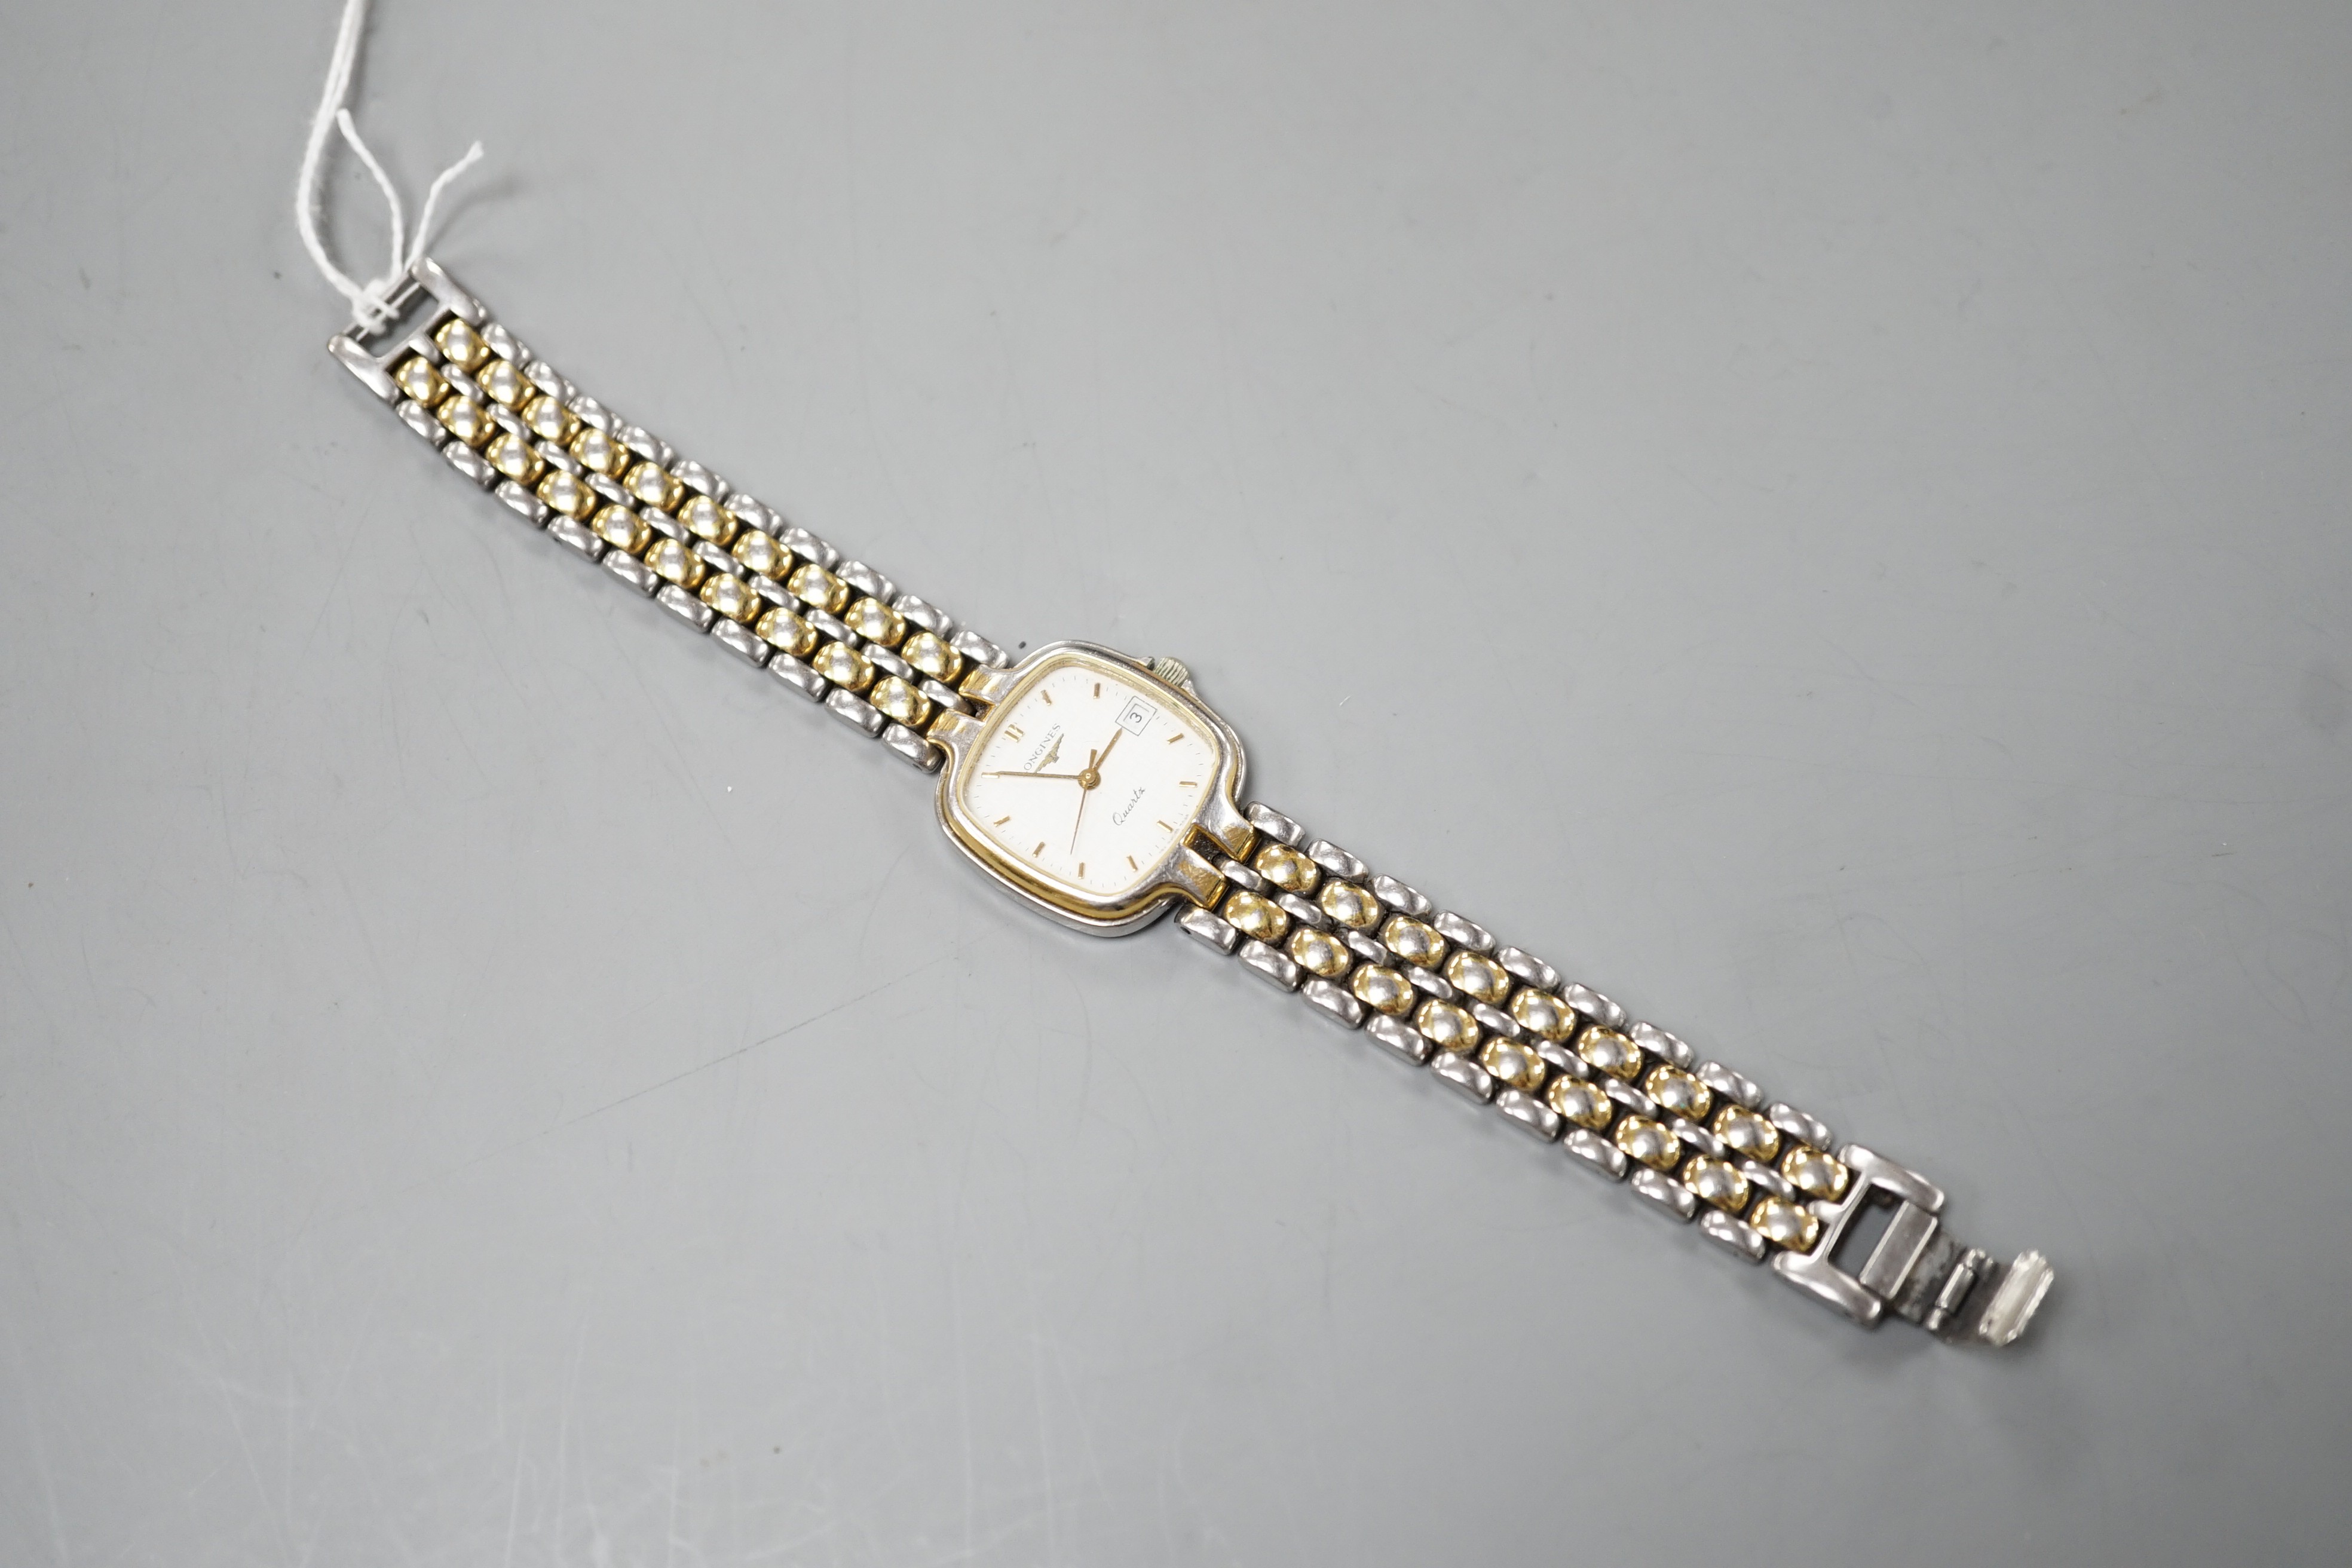 A lady's modern steel and gold plated Longines quartz wrist watch, on a steel and gold plated Longines bracelet.